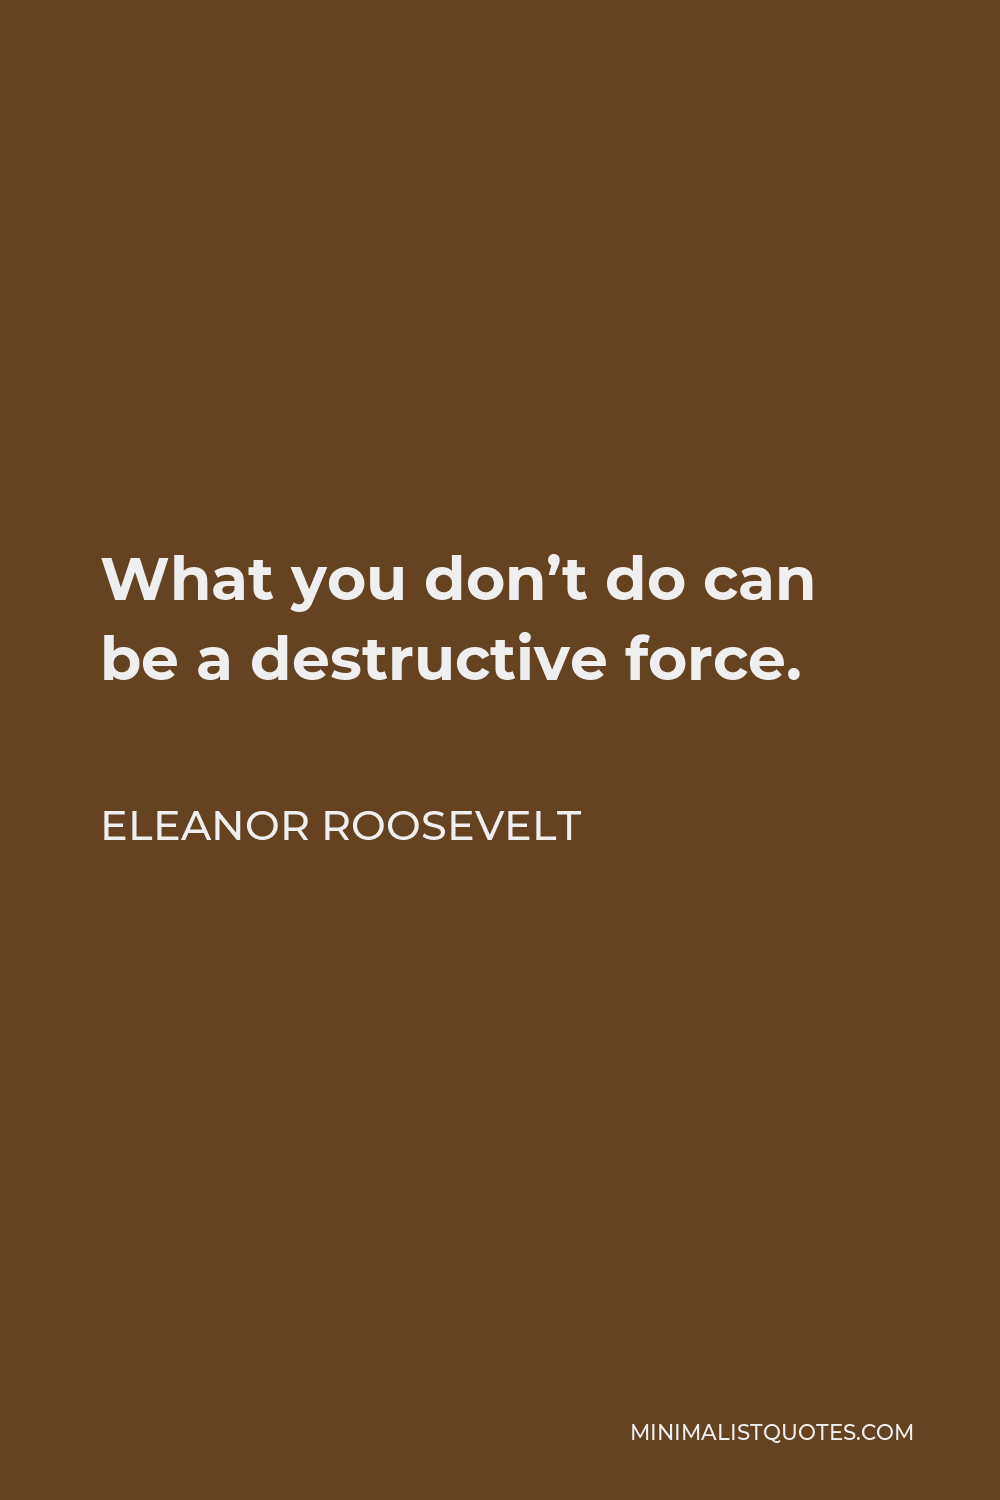 Eleanor Roosevelt Quote - What you don’t do can be a destructive force.